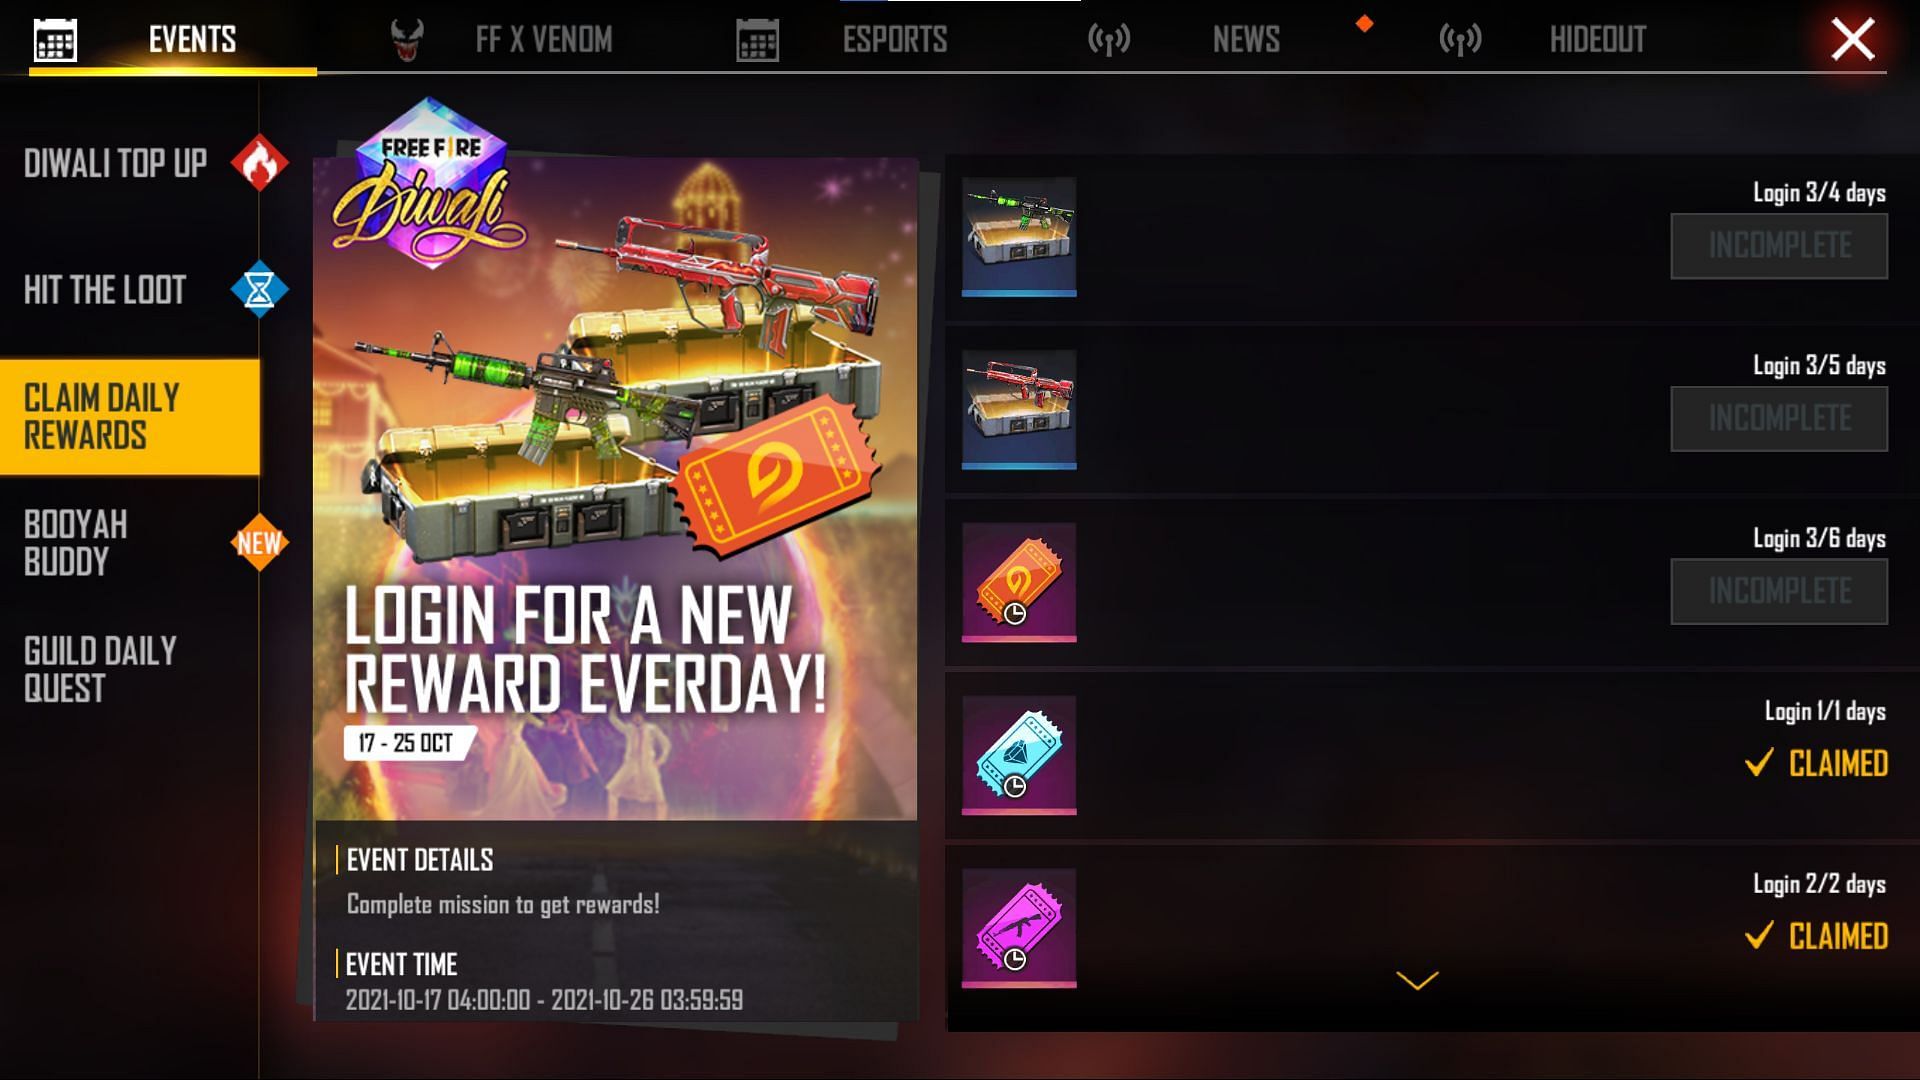 Upon logging in, players will receive a free reward (Image via Free Fire)